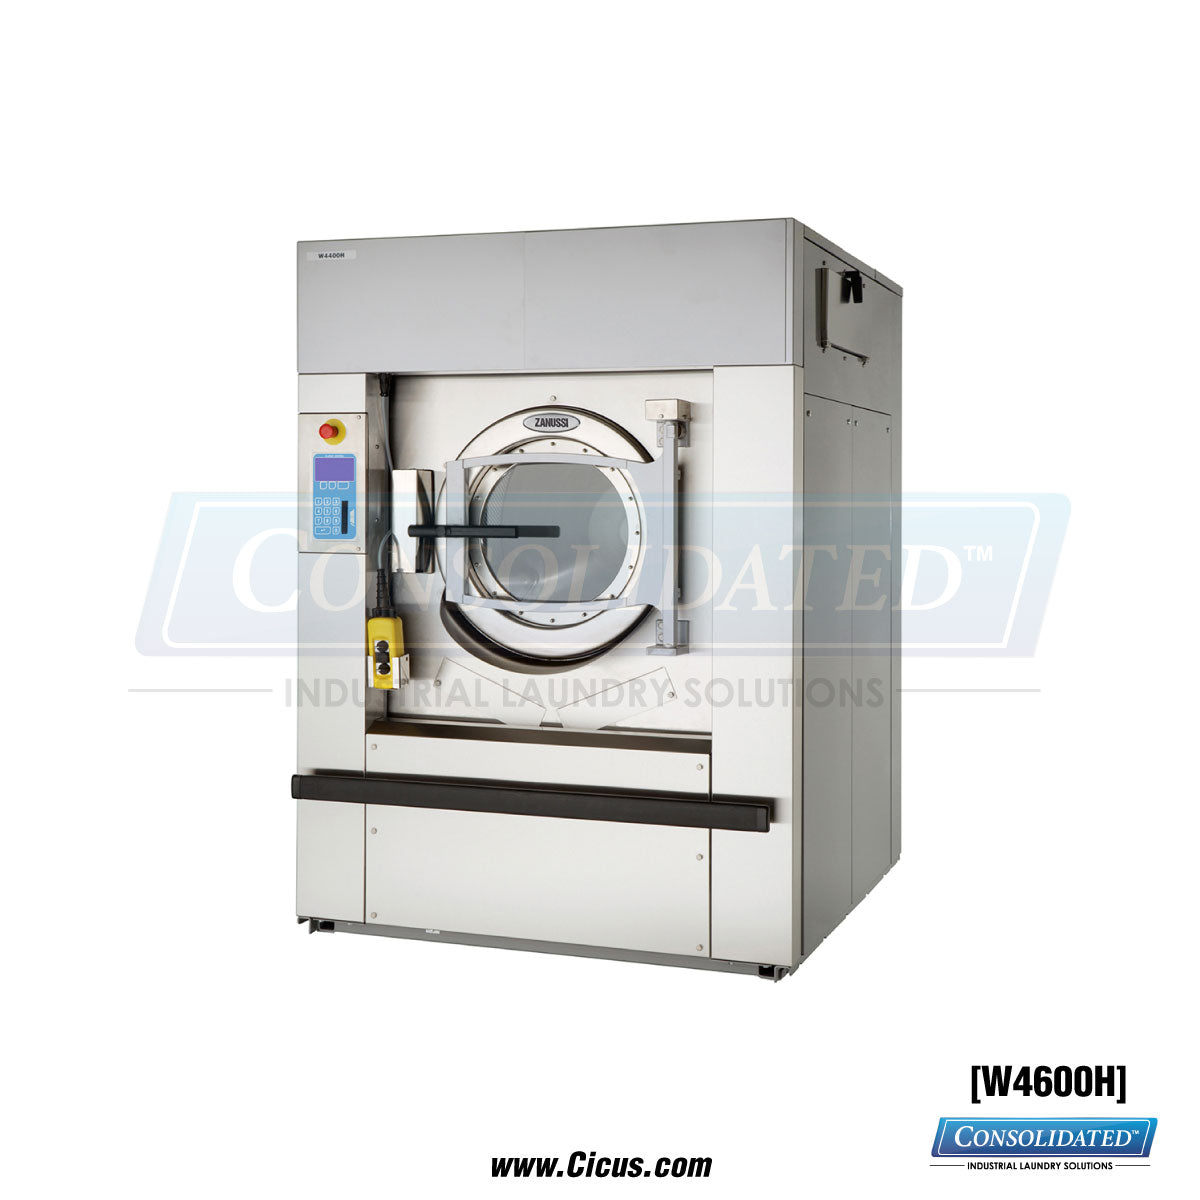 Electrolux G-Force Soft-Mount 145 LB Washer [W4600H]